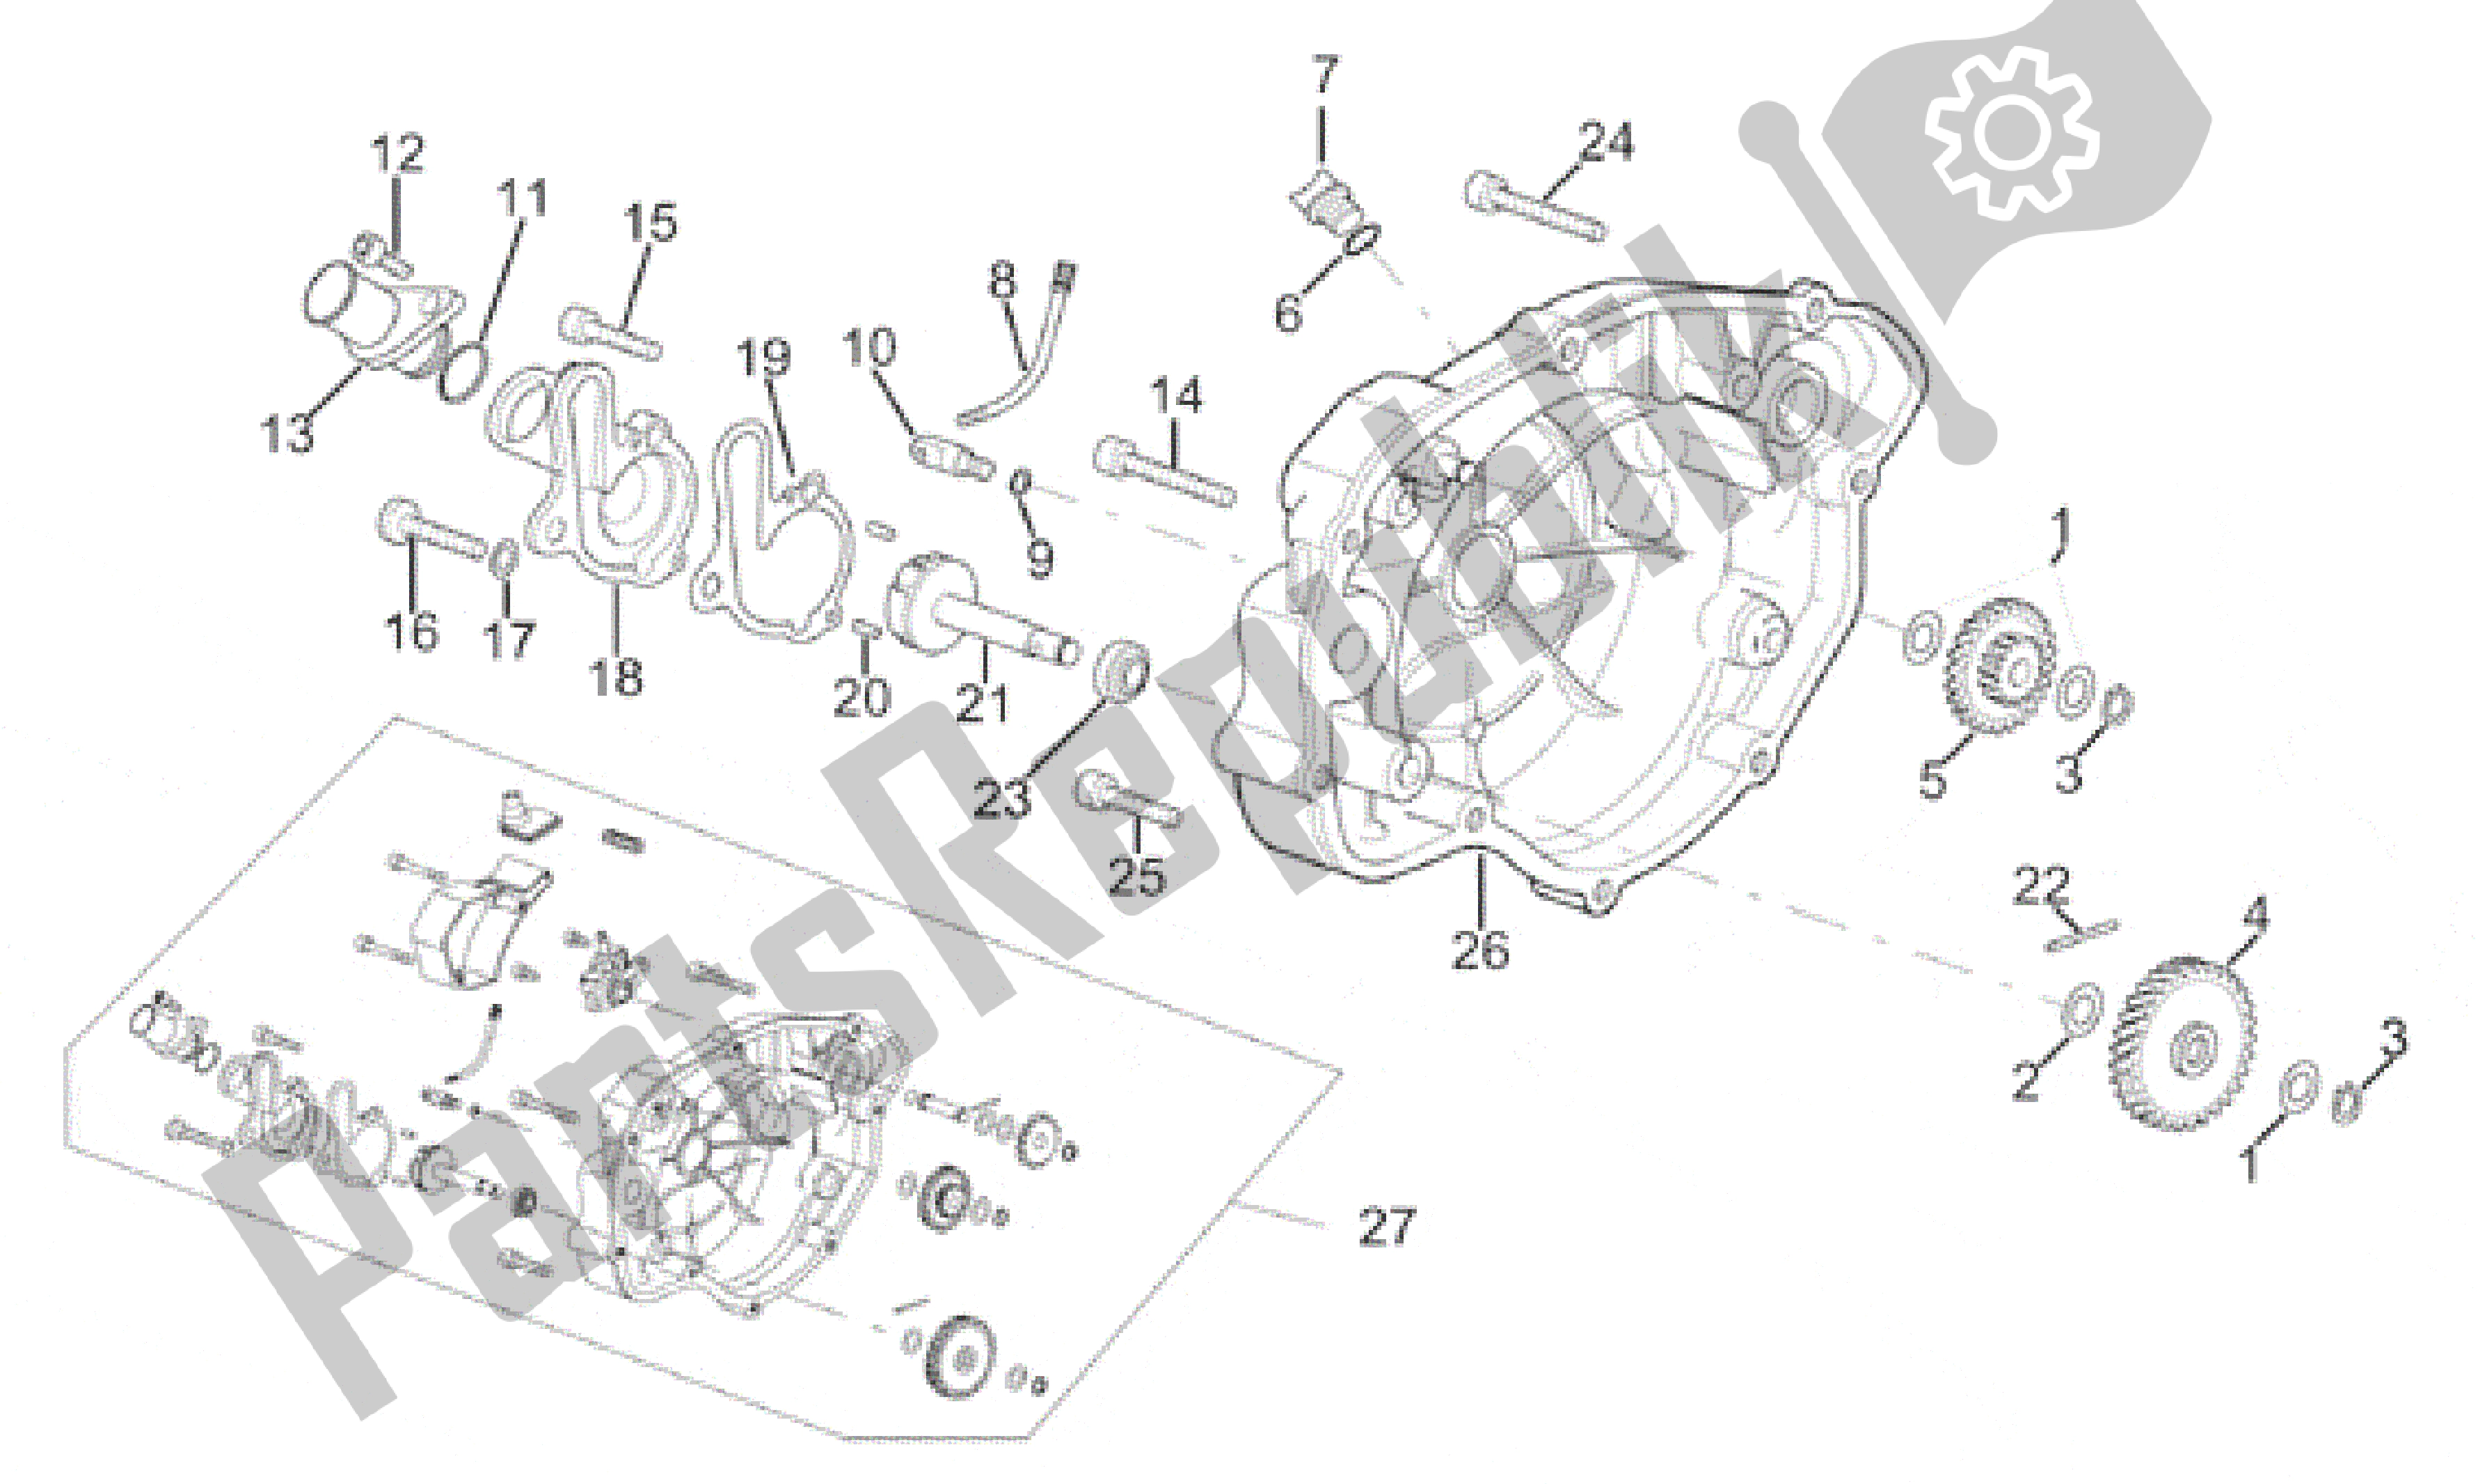 All parts for the Clutch Cover of the Aprilia RS 50 1996 - 1998